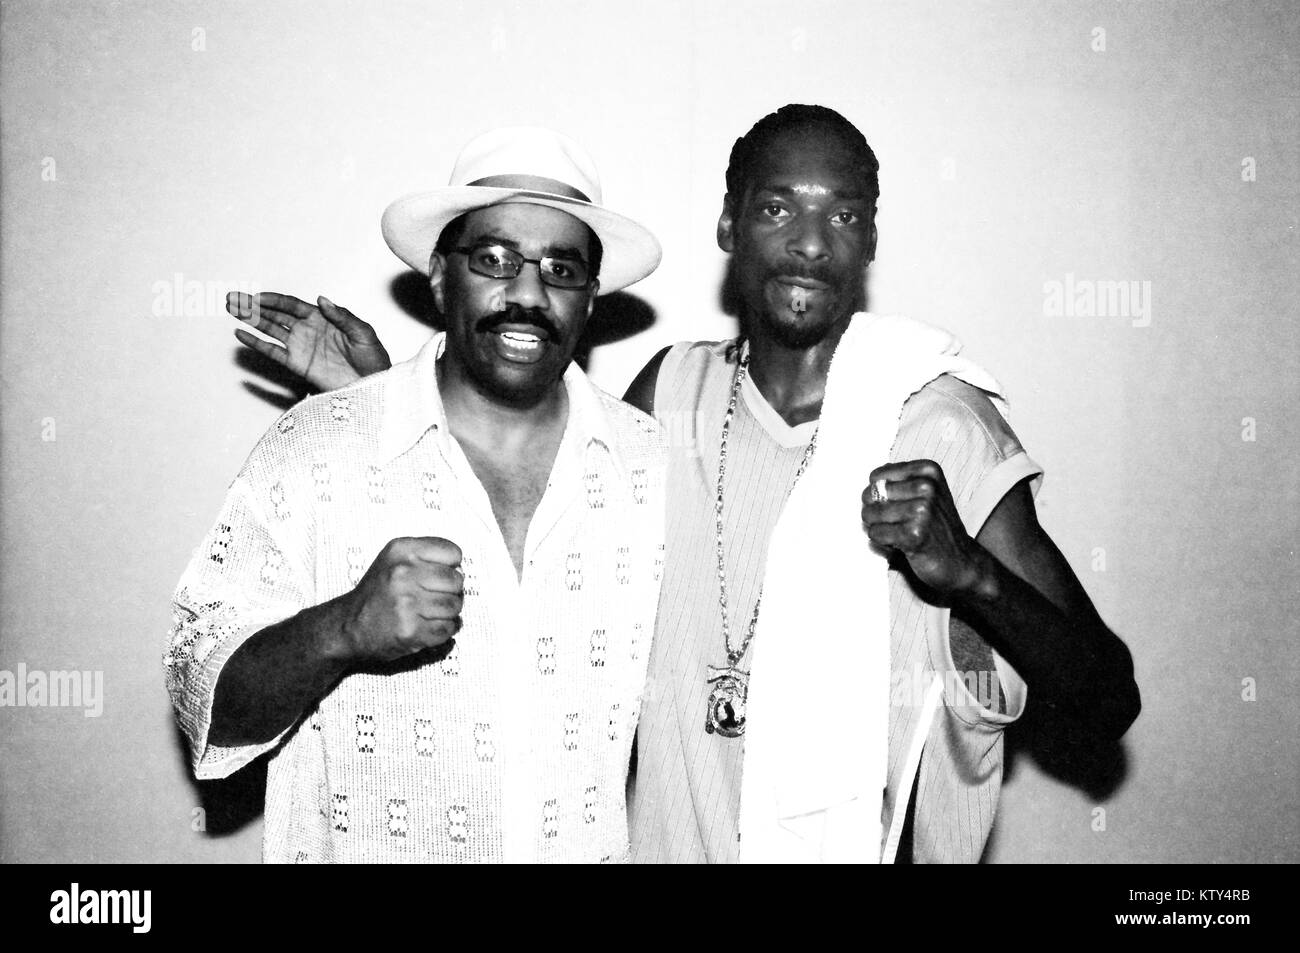 IRVINE, CA - 2002: Steve Harvey and Snoop Dogg pictured at stand up performance in Irvine, California in 2002. Credit: Pat Johnson/MediaPunch Stock Photo